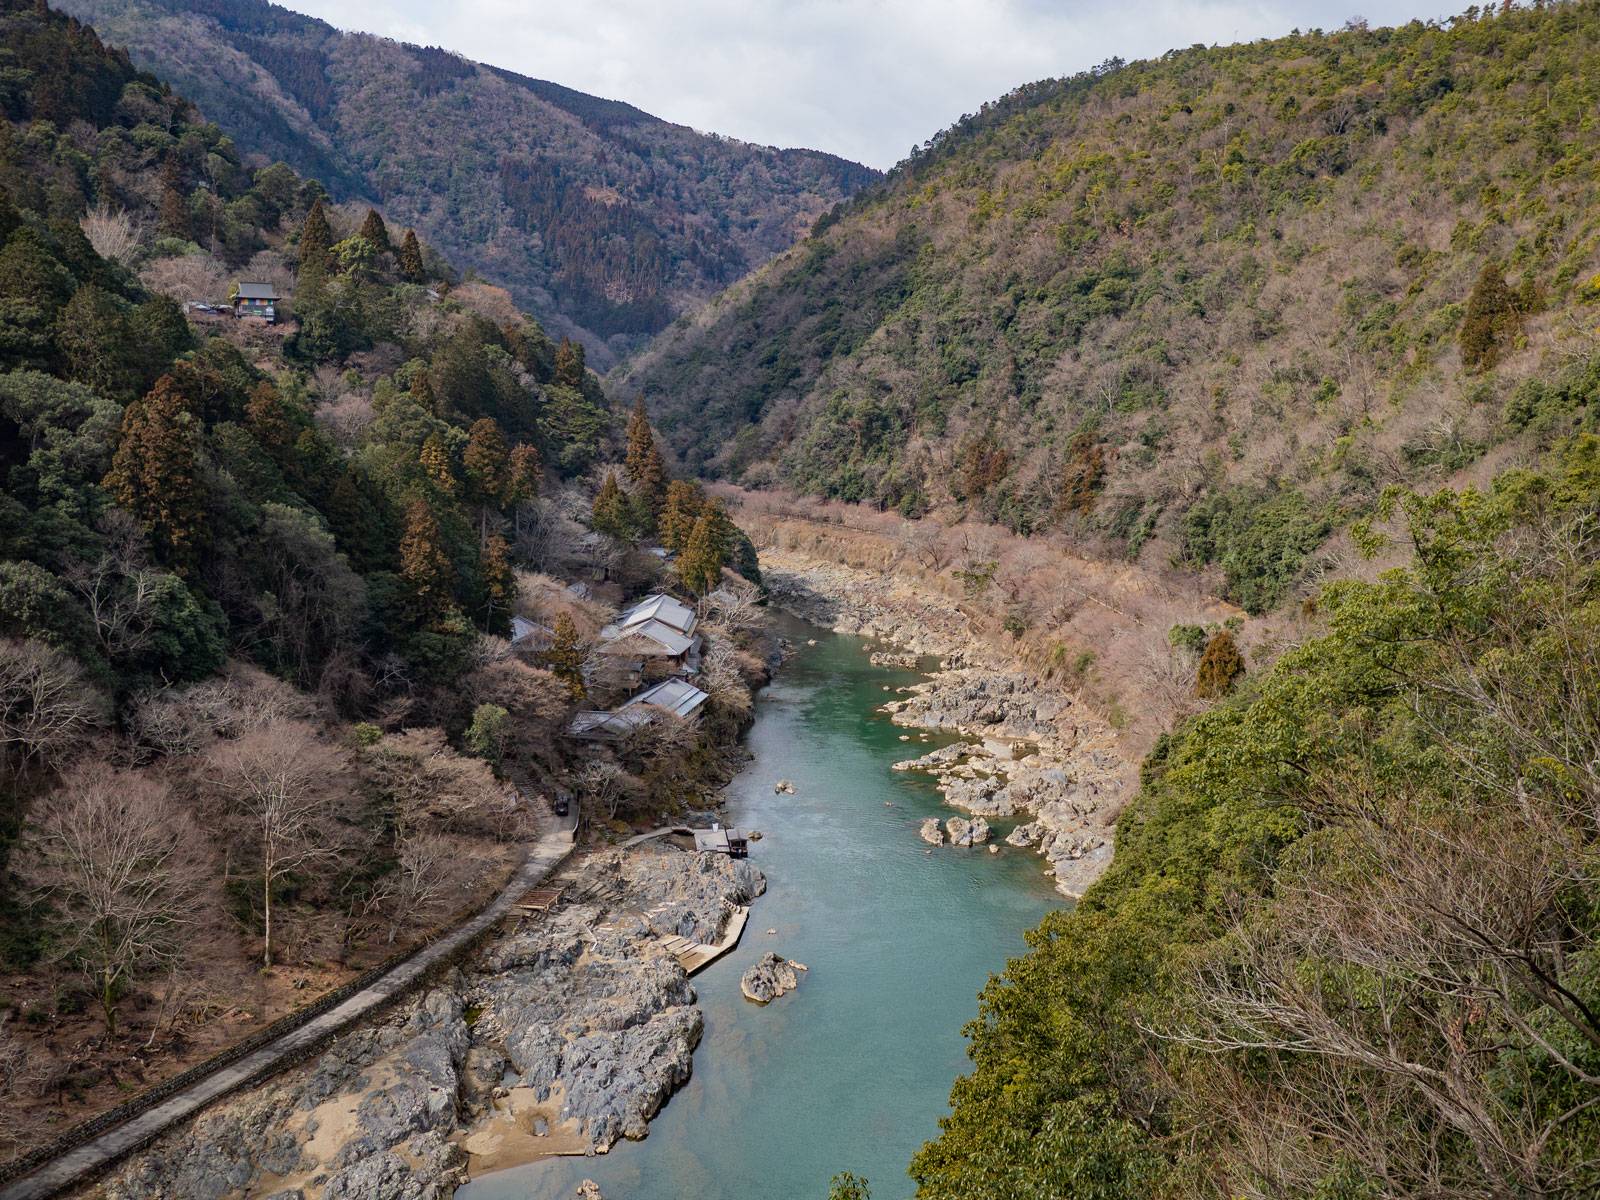 View of Arashiyama from the observation deck